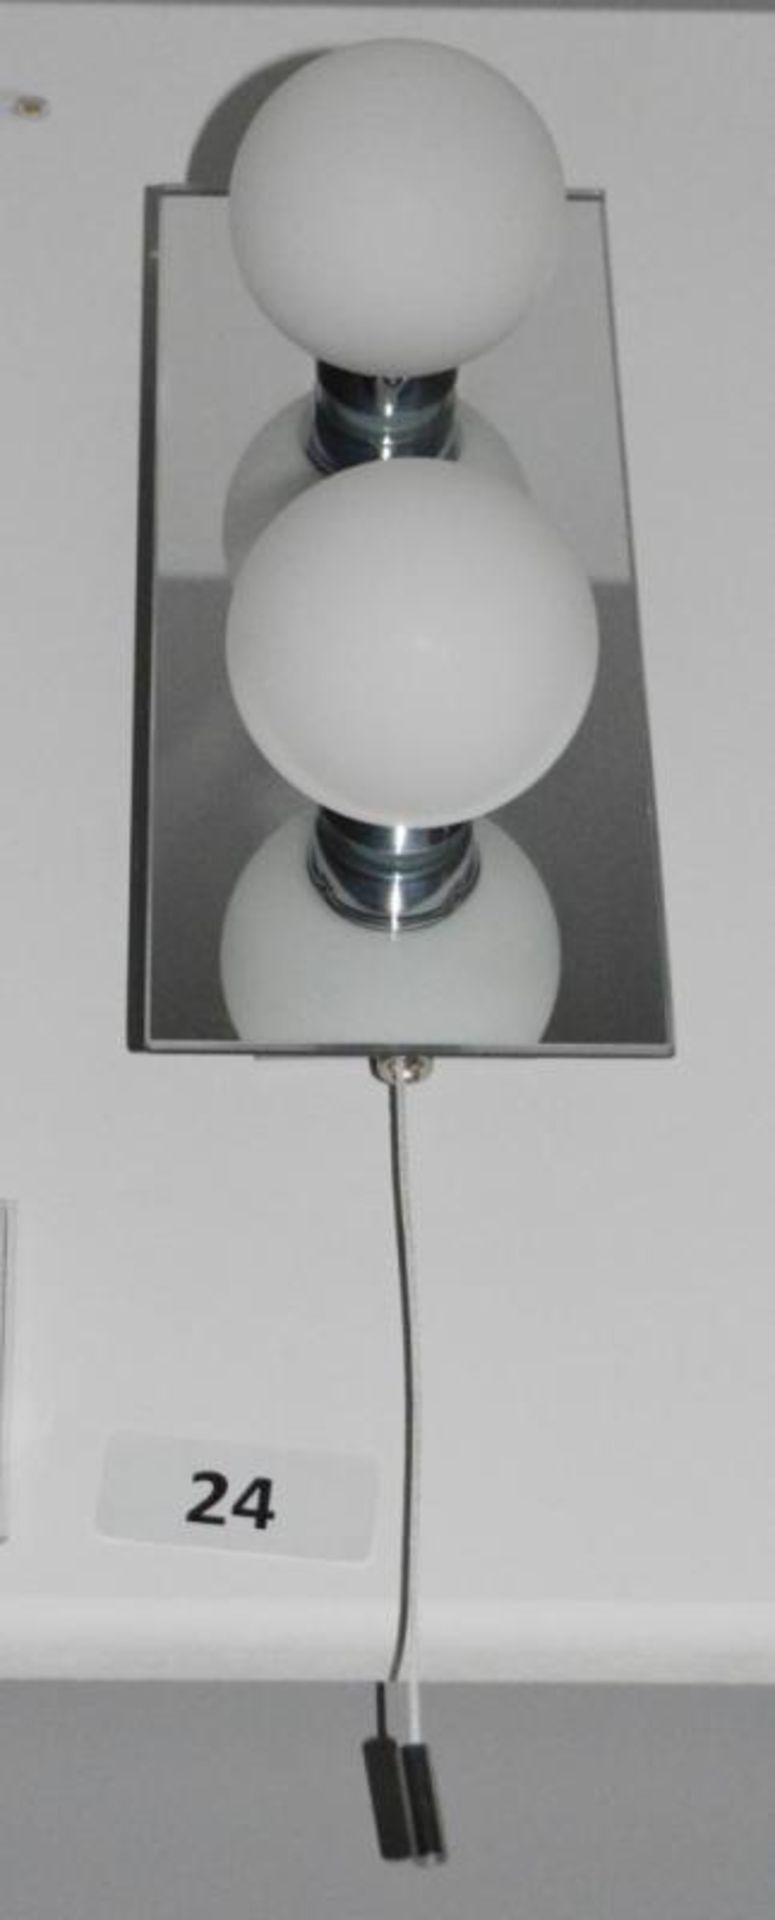 1 x Globe Wall Light With Chrome and Opal Glass Finish - IP44 Rated Suitable For Bathrooms - Ex Disp - Image 2 of 2